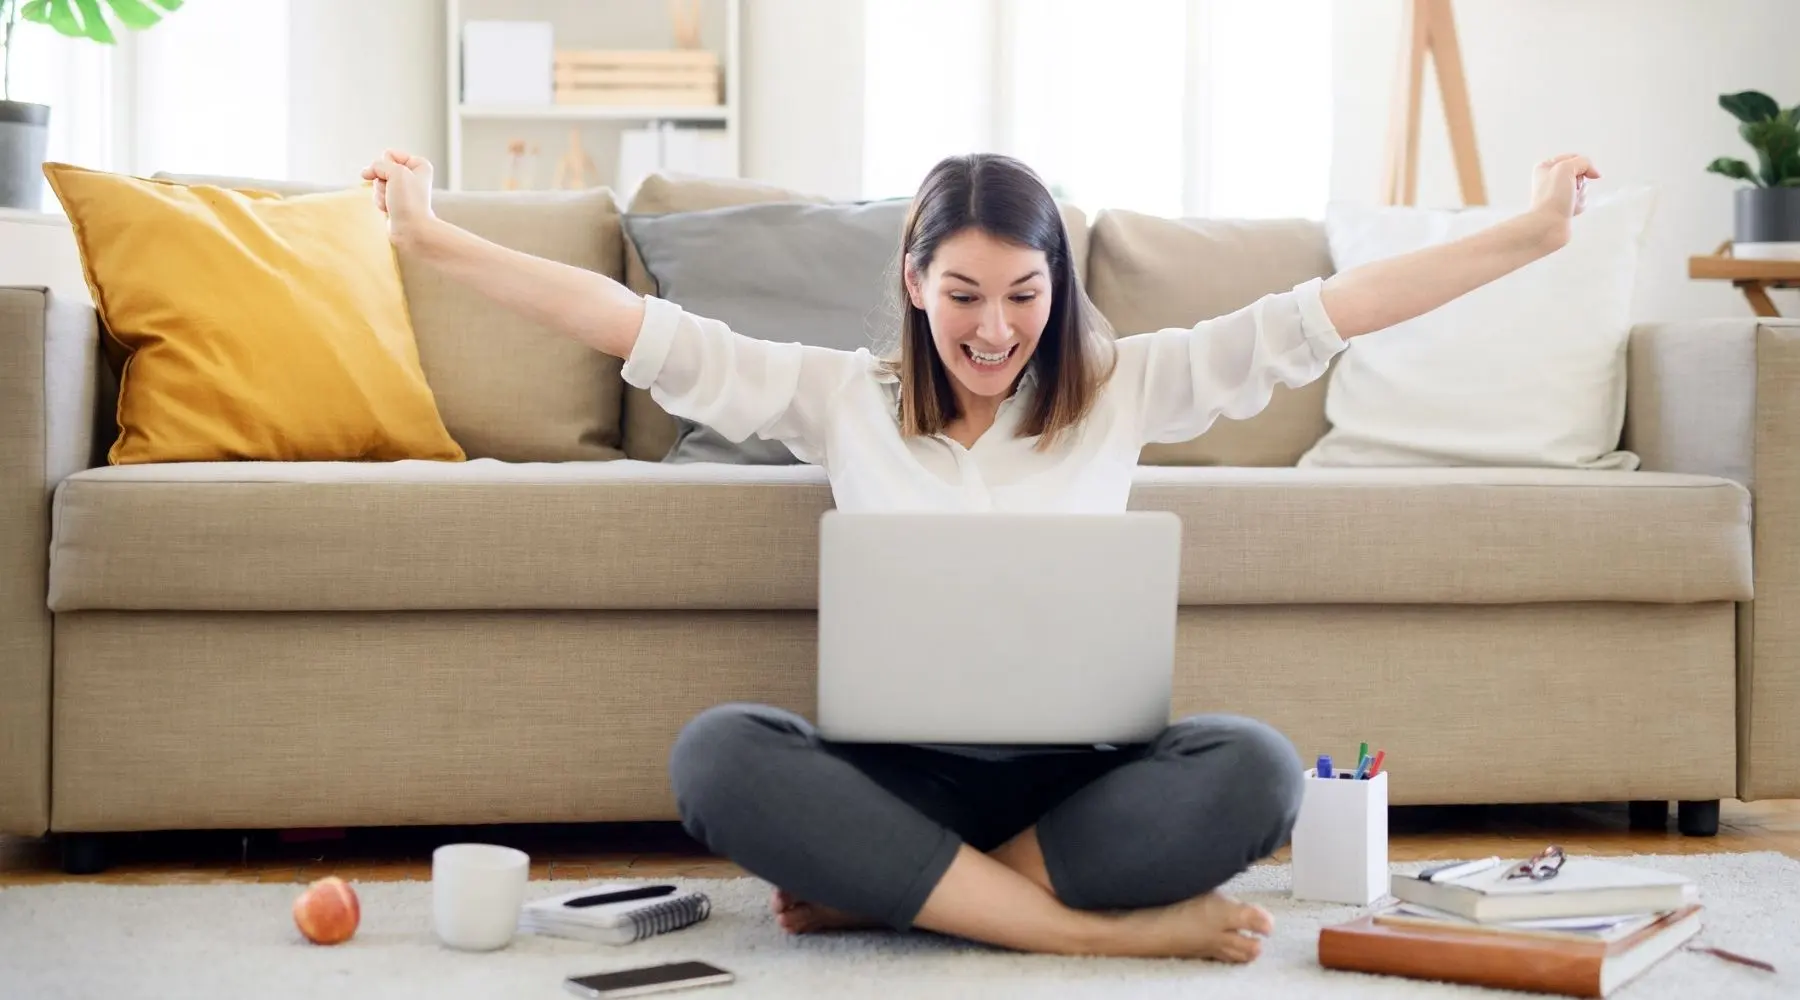 A young woman celebrates while sitting on the floor with her laptop.